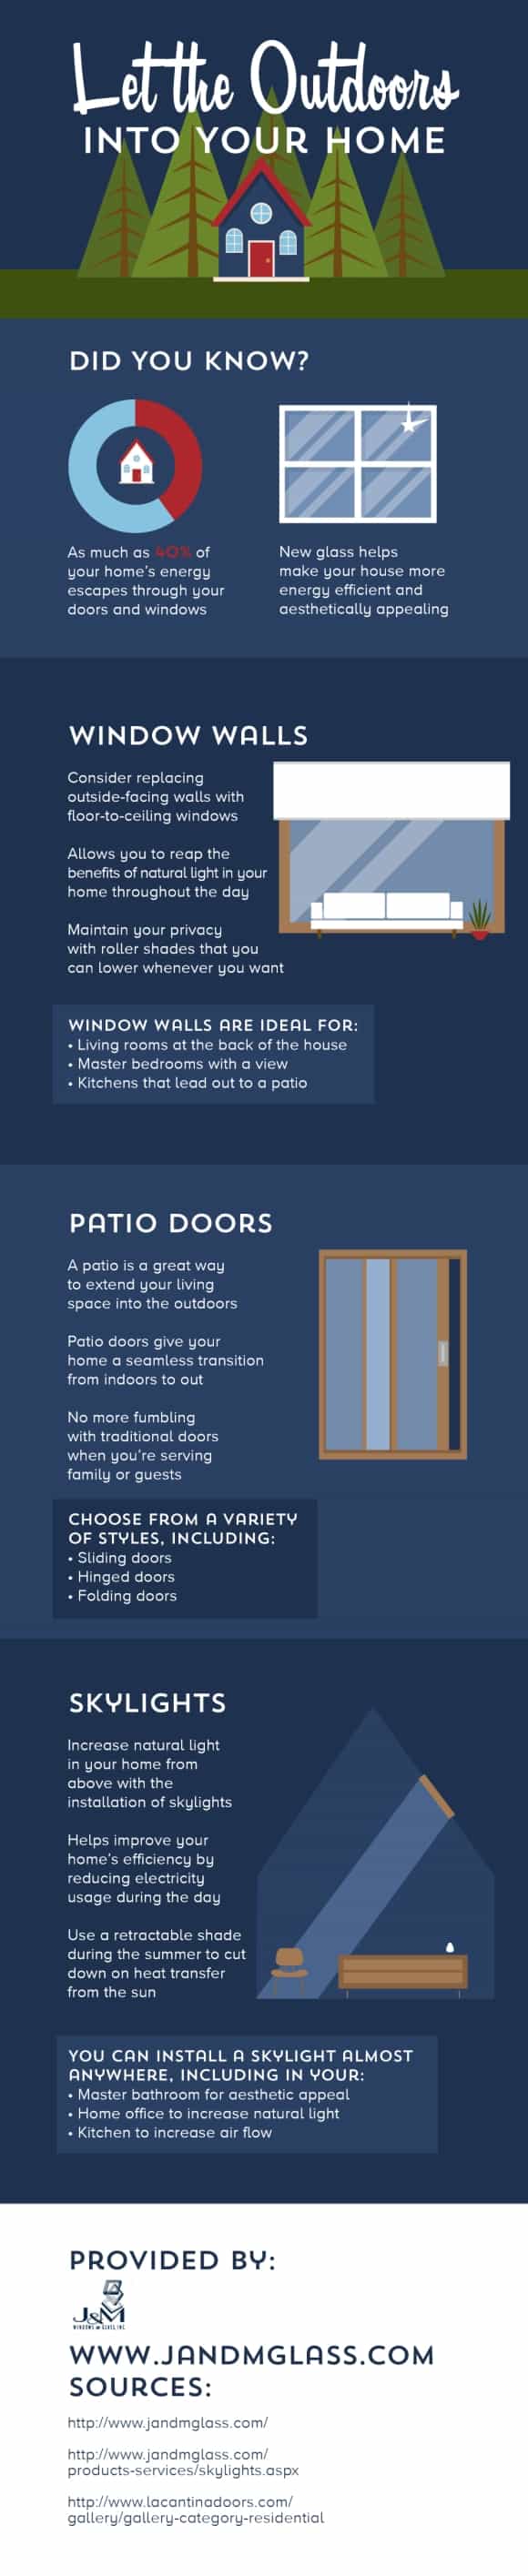 Let-the-Outdoors-Into-Your-Home-Infographic